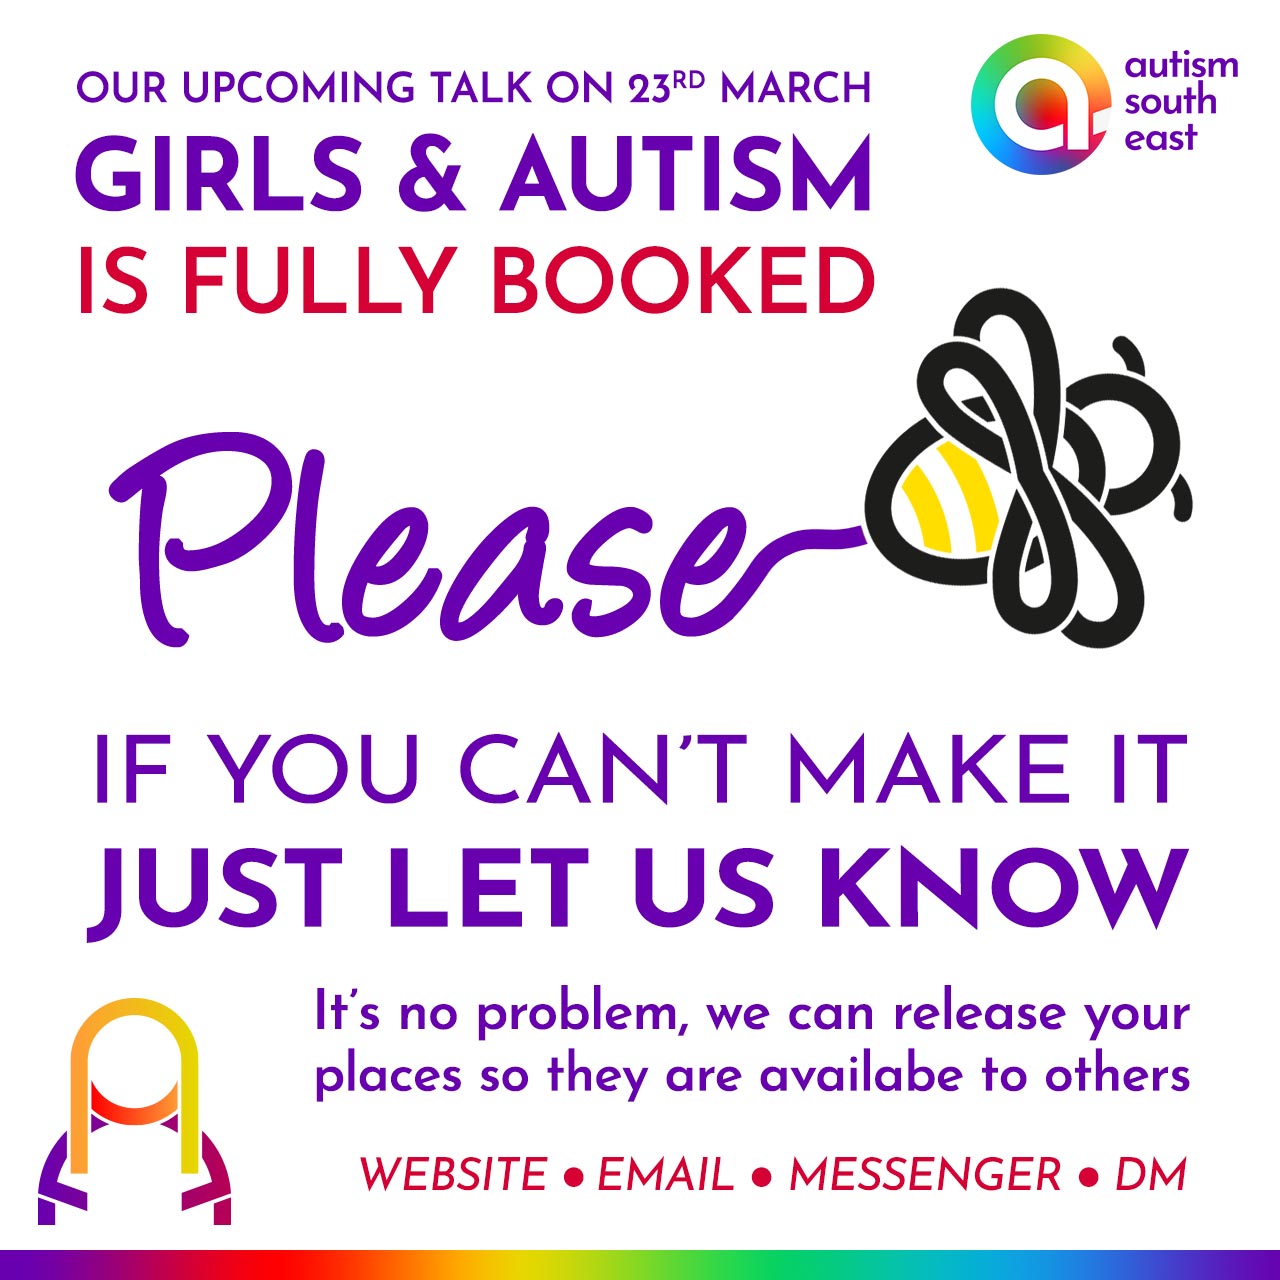 Girls & Autism FULLY BOOKED – Can you make it?